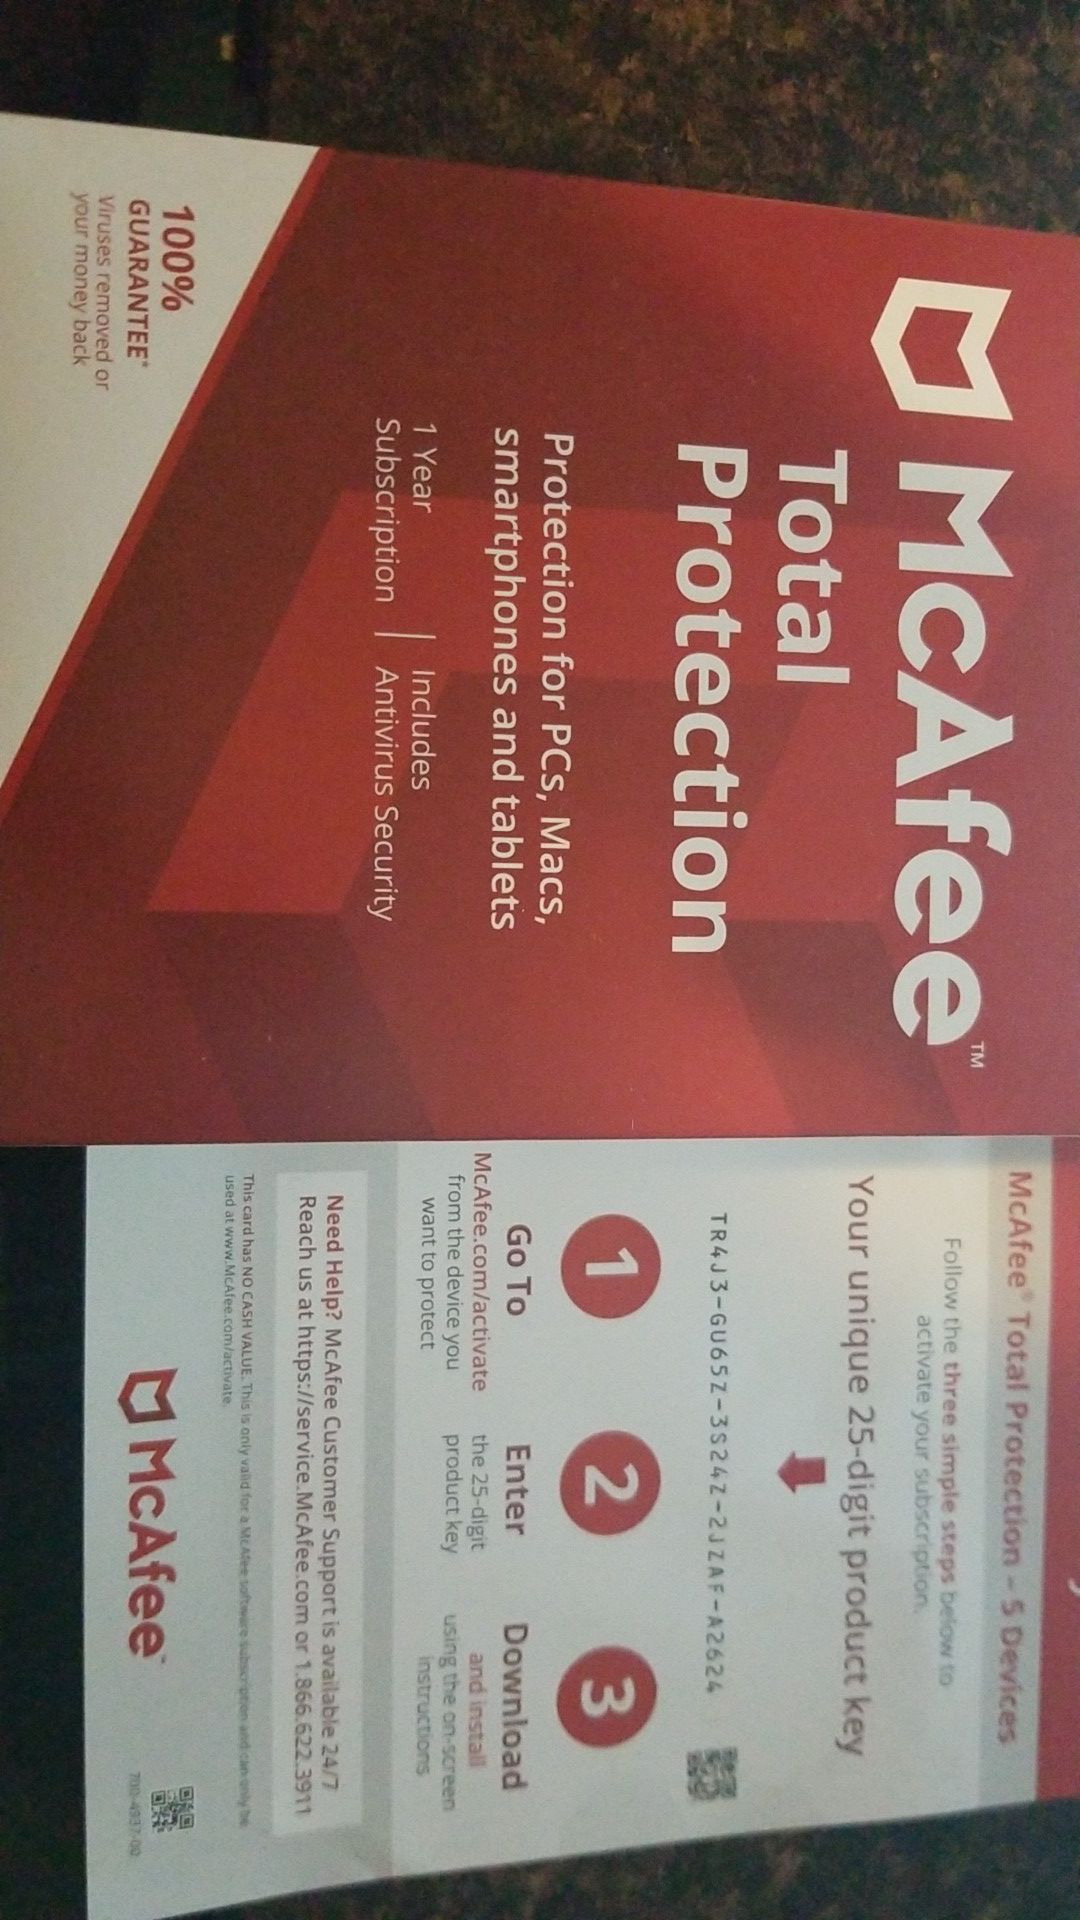 McAfee total protection